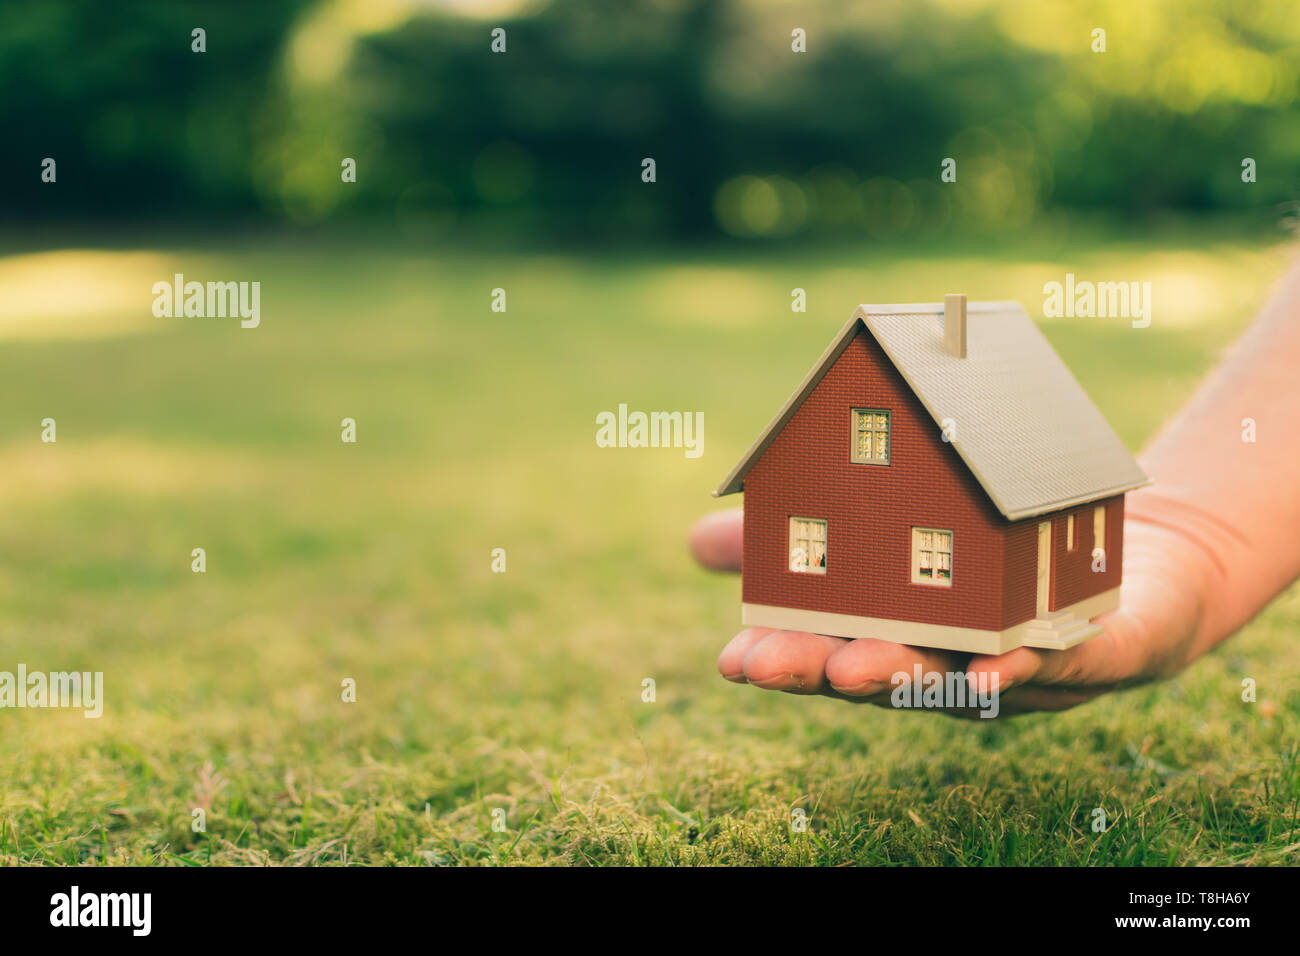 Concept of selling a house. A hand is holding a model house above green meadow. Stock Photo